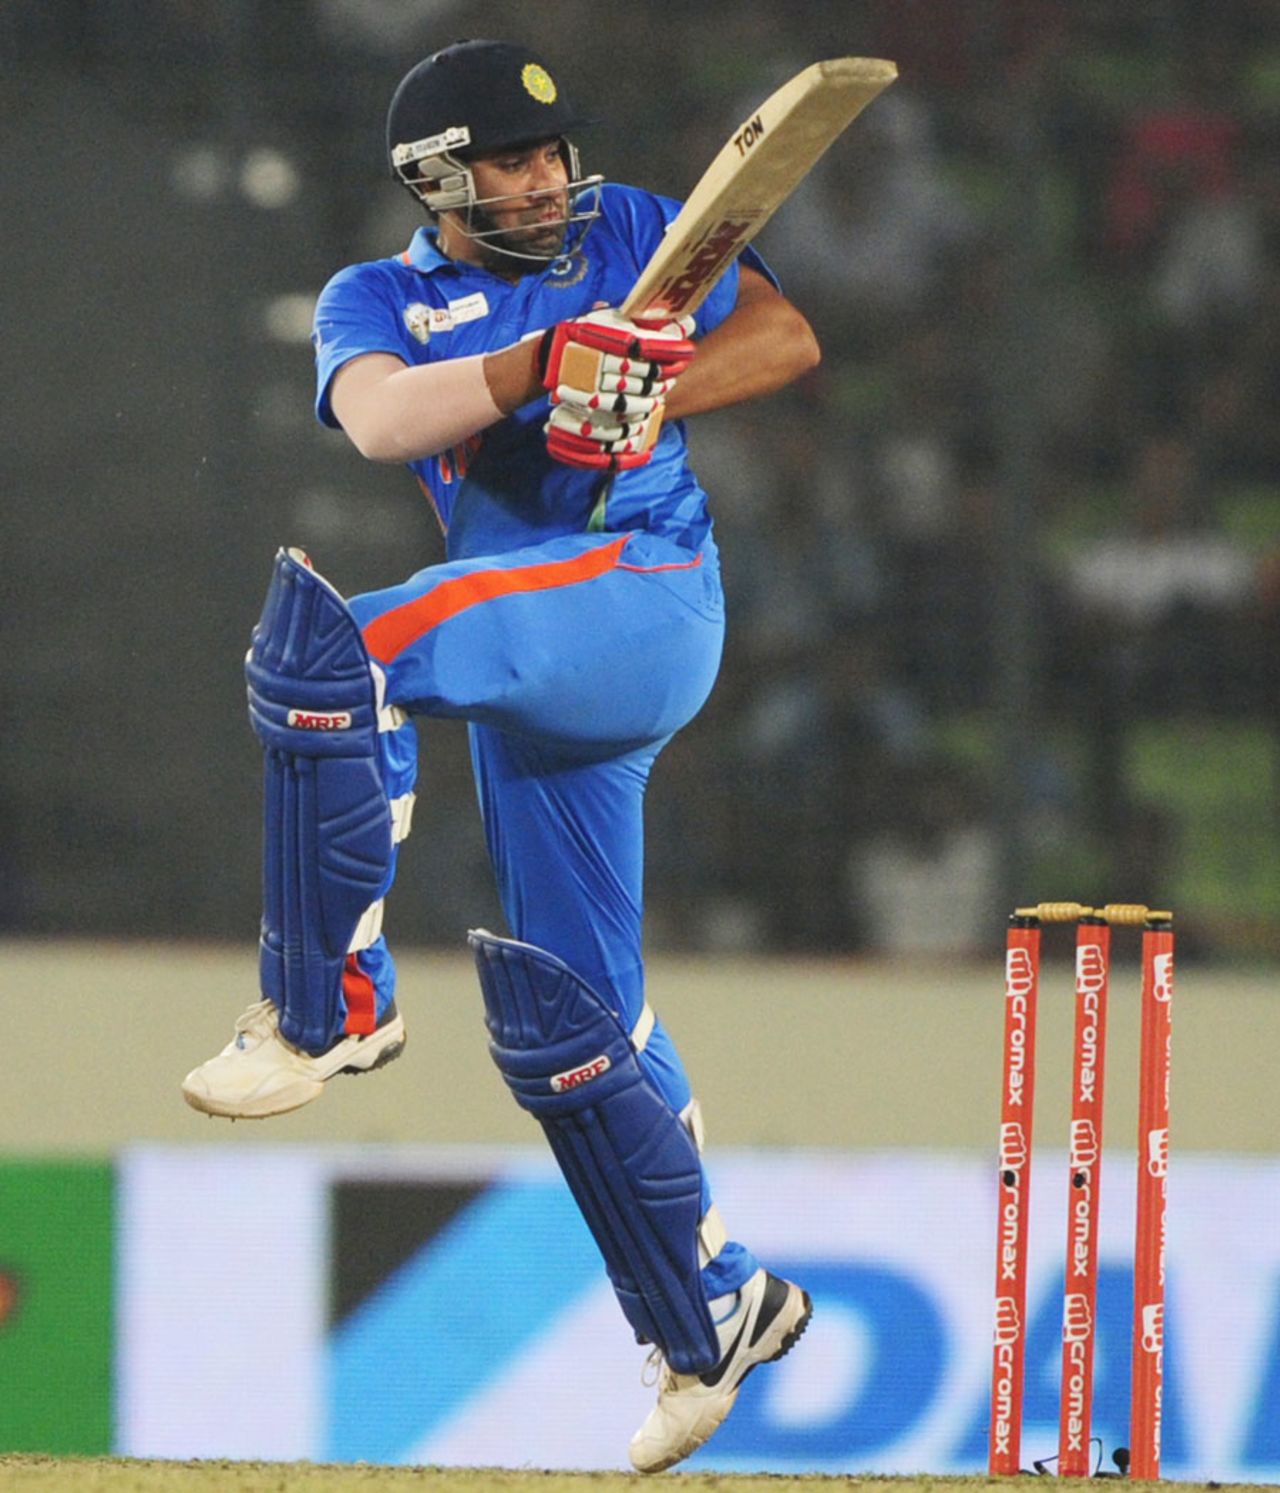 Rohit Sharma turns one off his hips, India v Pakistan, Asia Cup, Mirpur, March 18, 2012